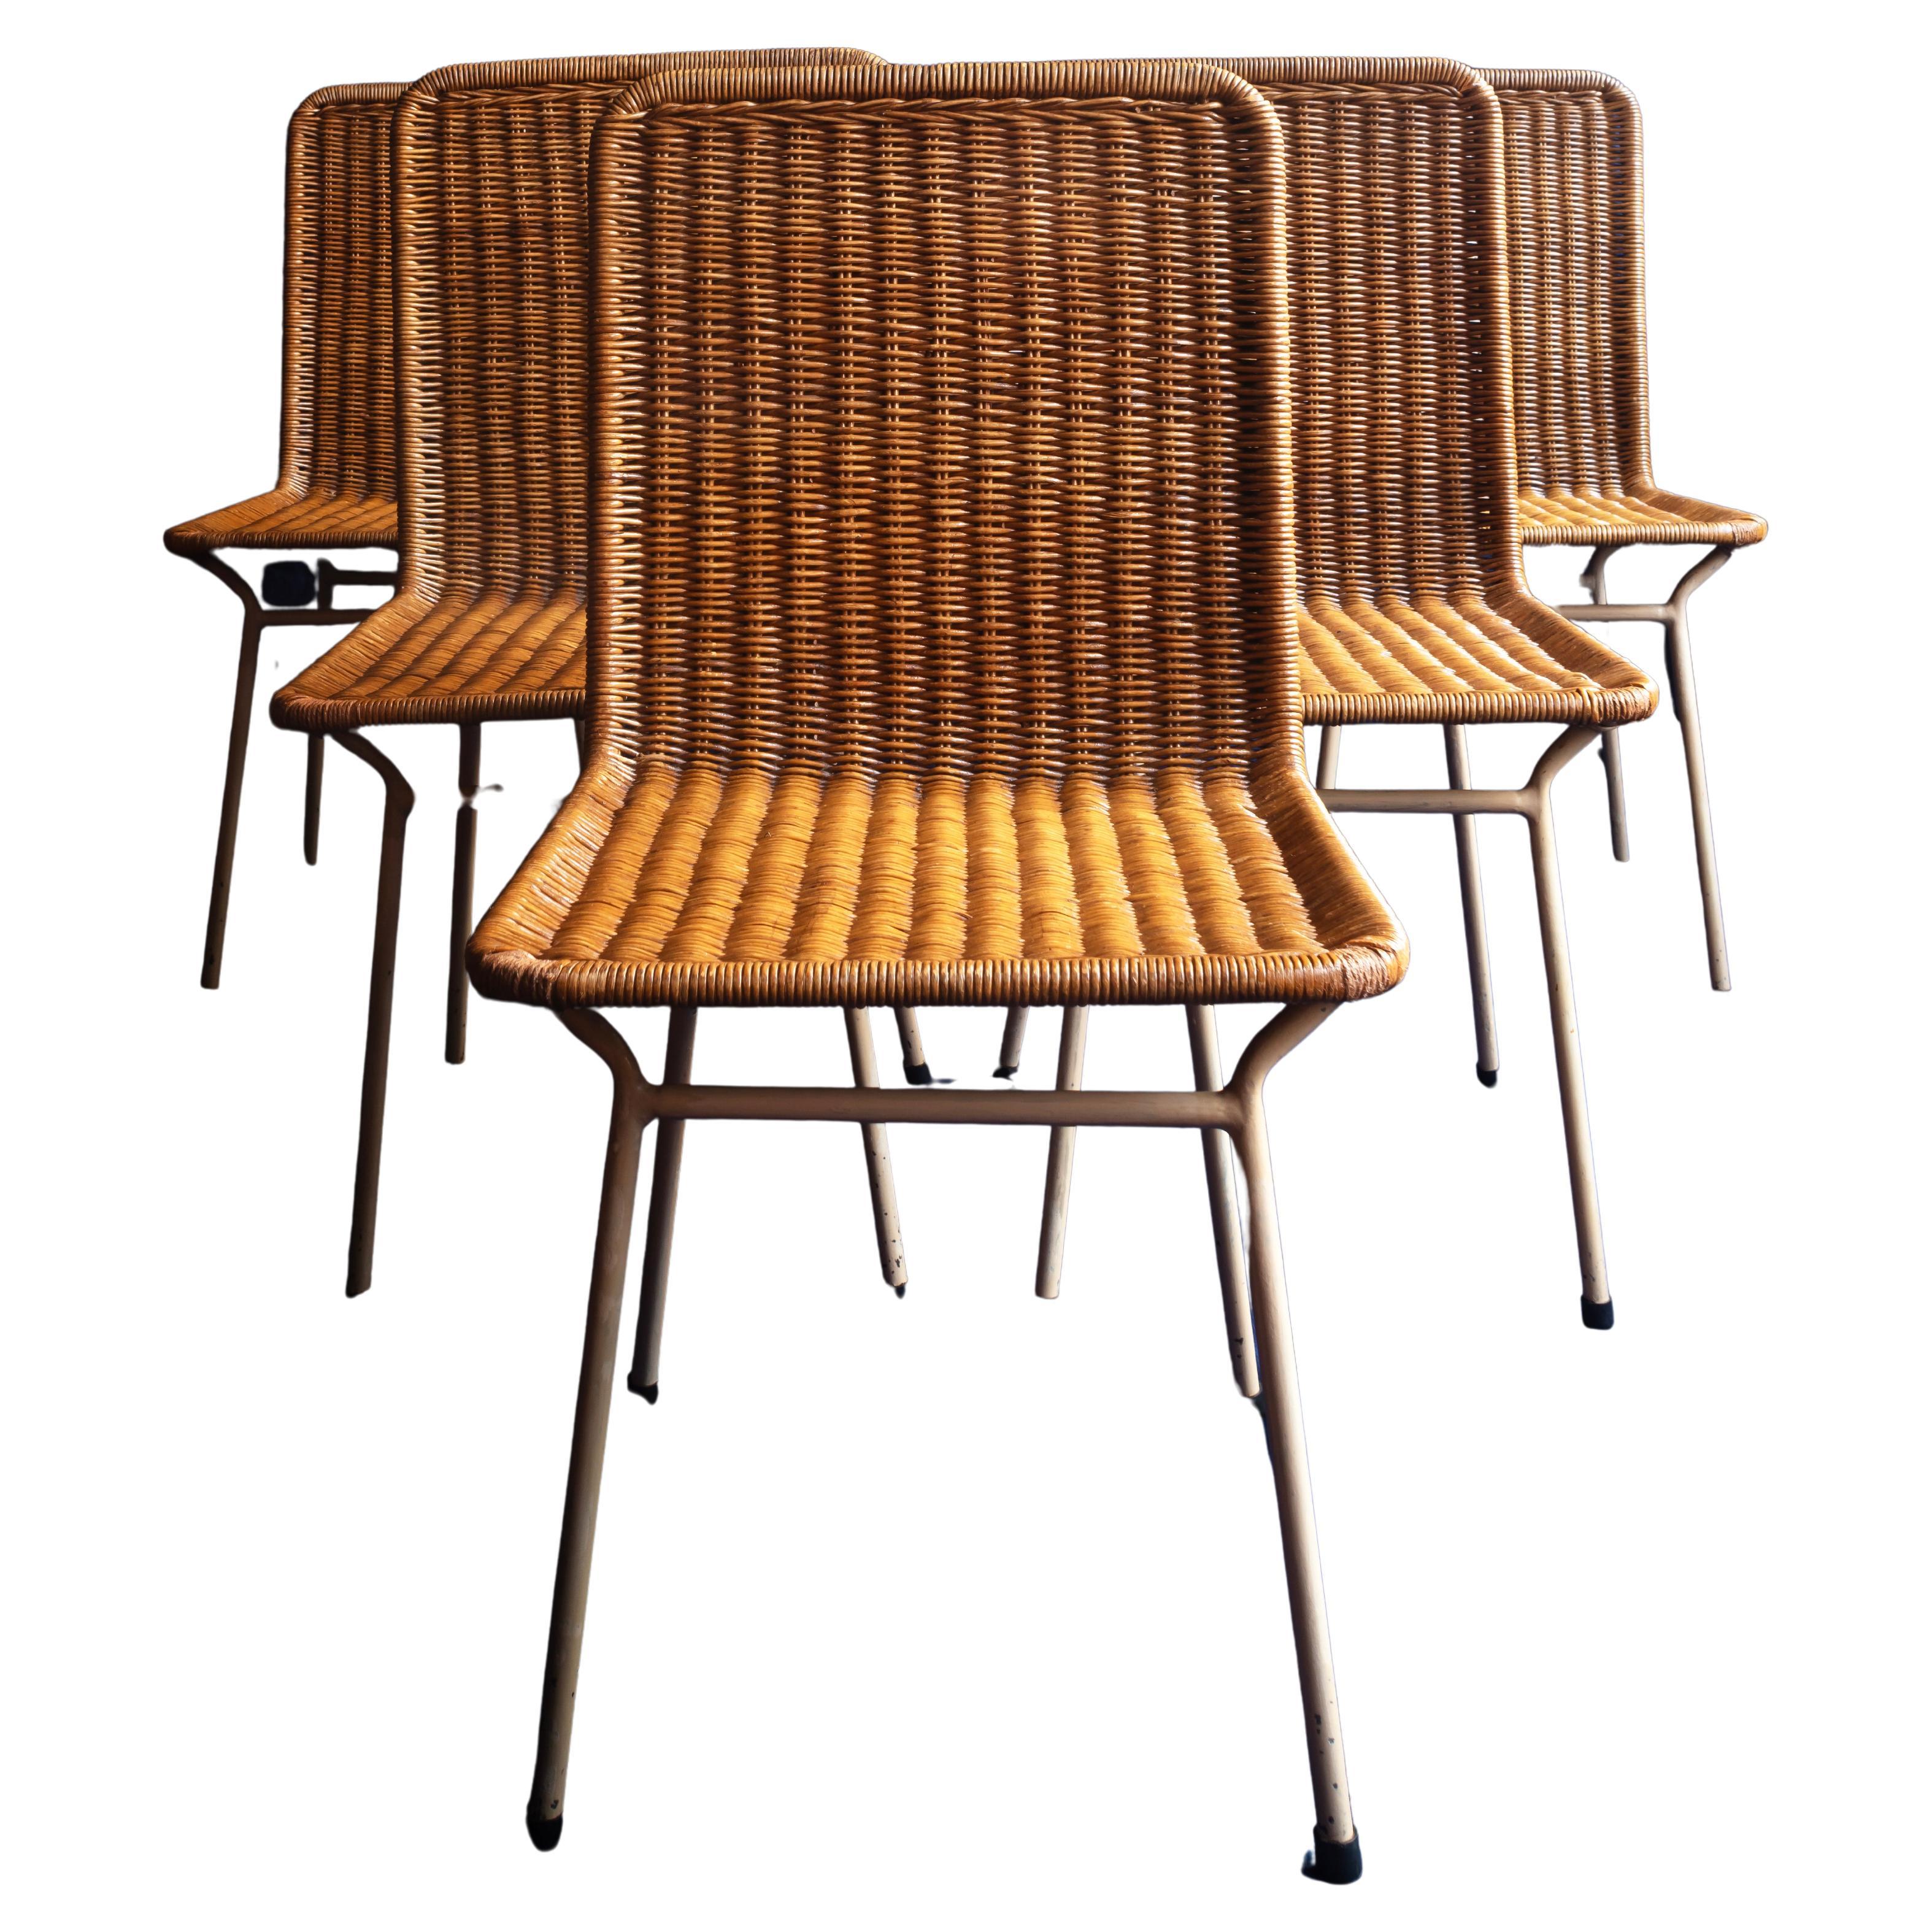 A rare set of six rattan and enamelled iron chairs.
Carlo Hauner for Forma Moveis, Brazillian, 1955.
It is unusual to find a good set of these chairs by a master of Italian/Brazilian design. This set has been carefully cleaned and tidied up with